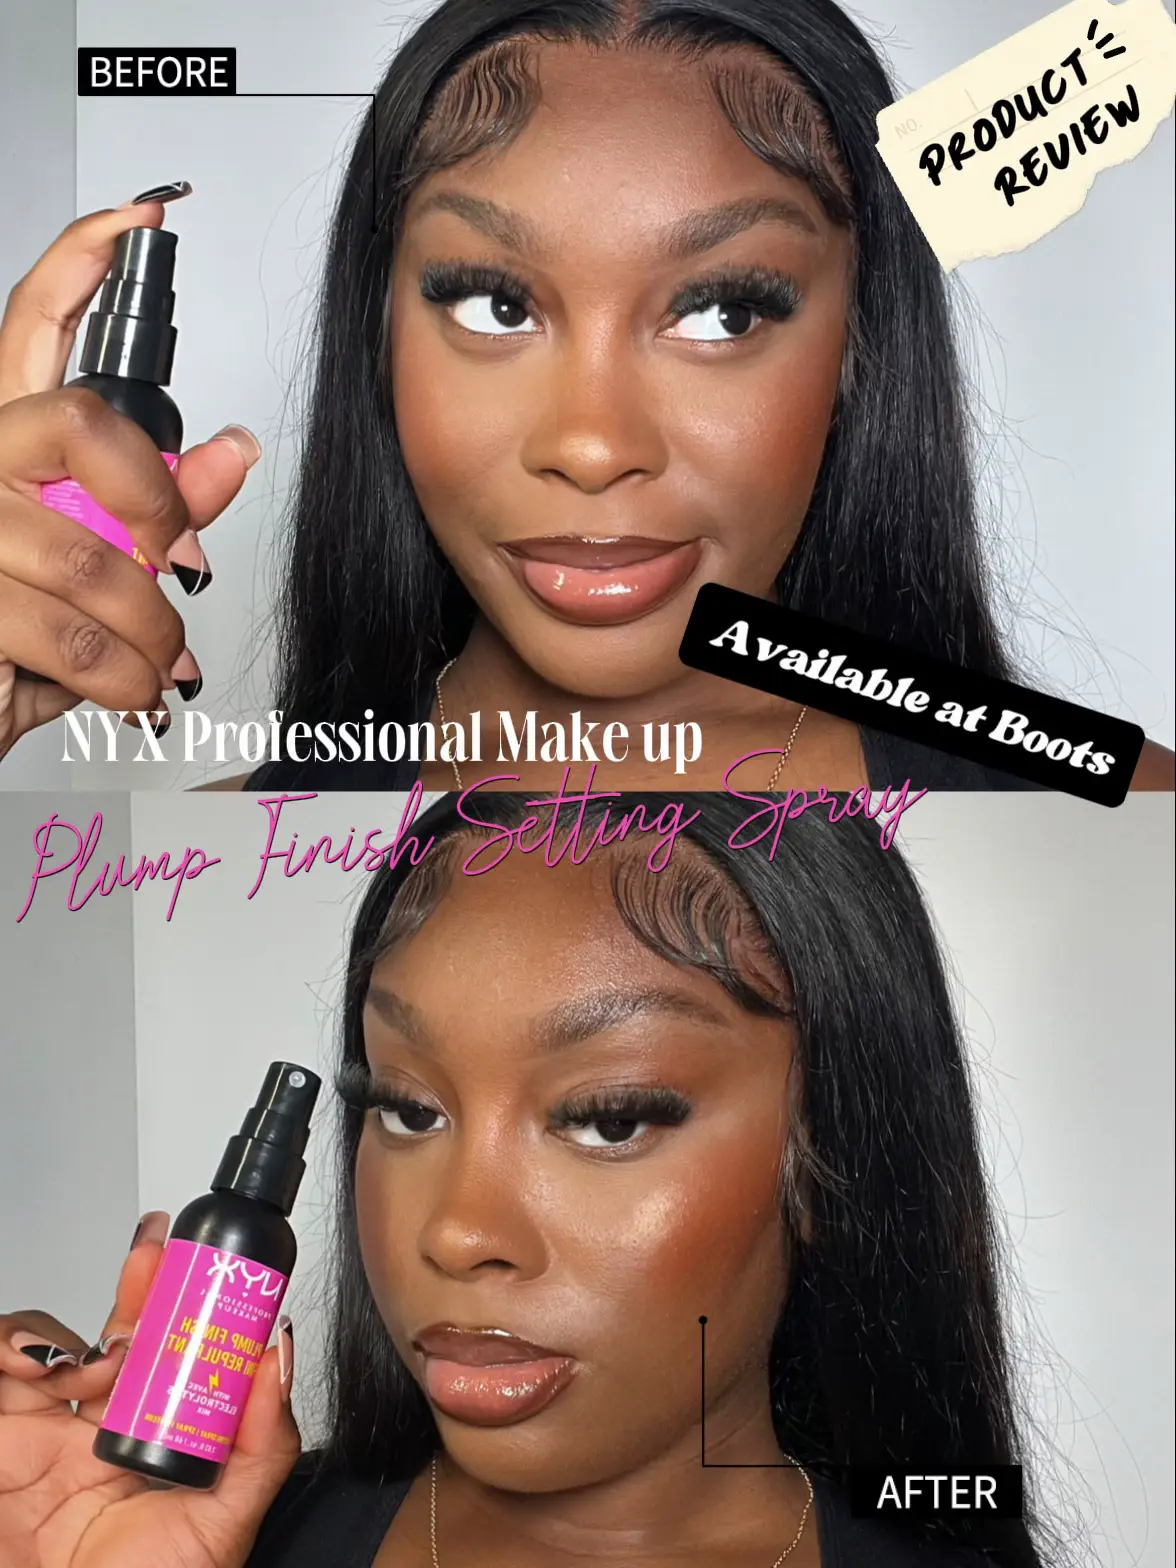 NYX Lemon8 Finish | posted Gallery | Plump Sharnteparkes Professional by Spray Setting